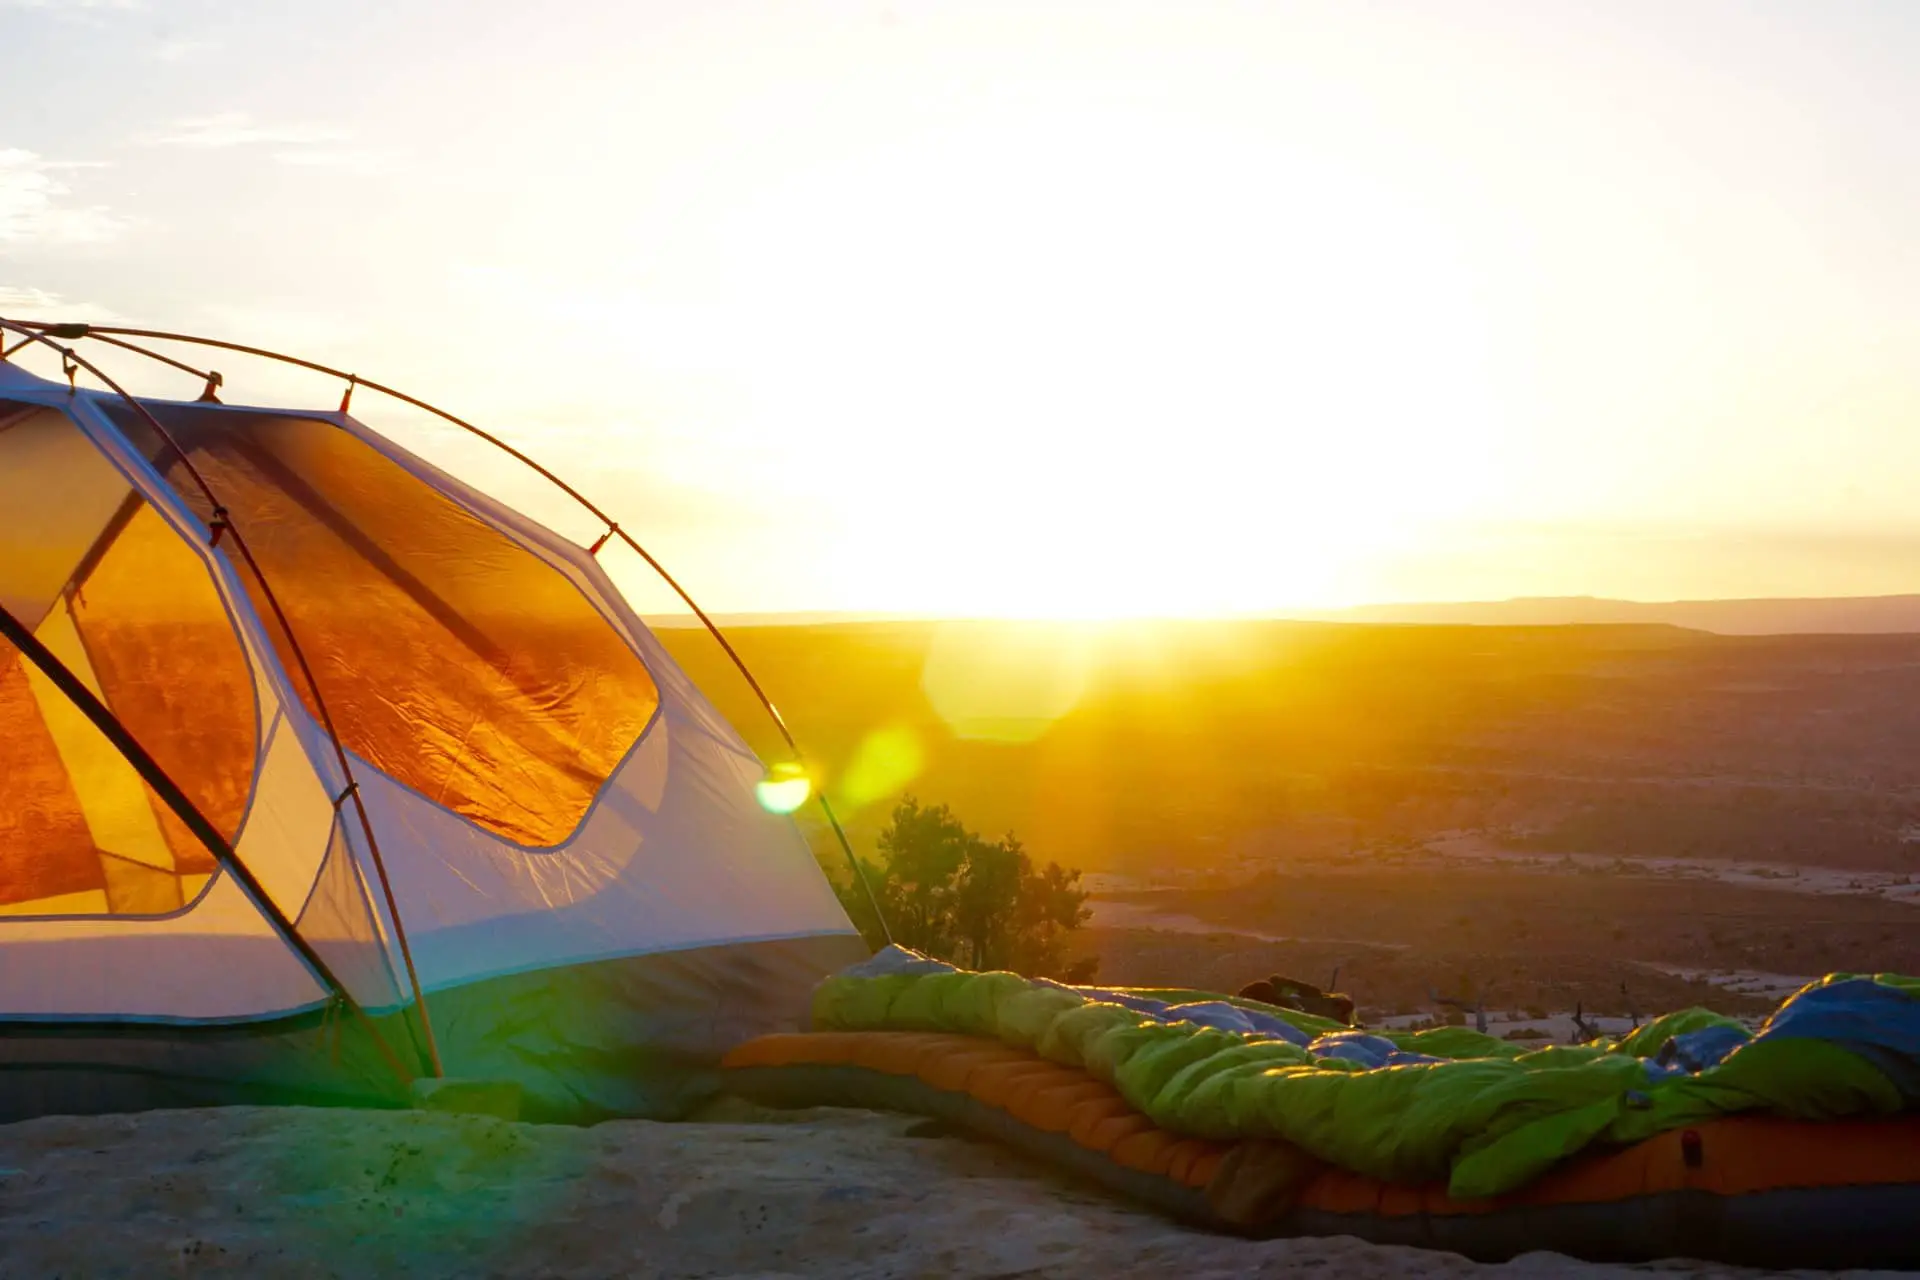 The best backpacking sleeping bags under $100 will let you wake up to beautiful sunrises like this